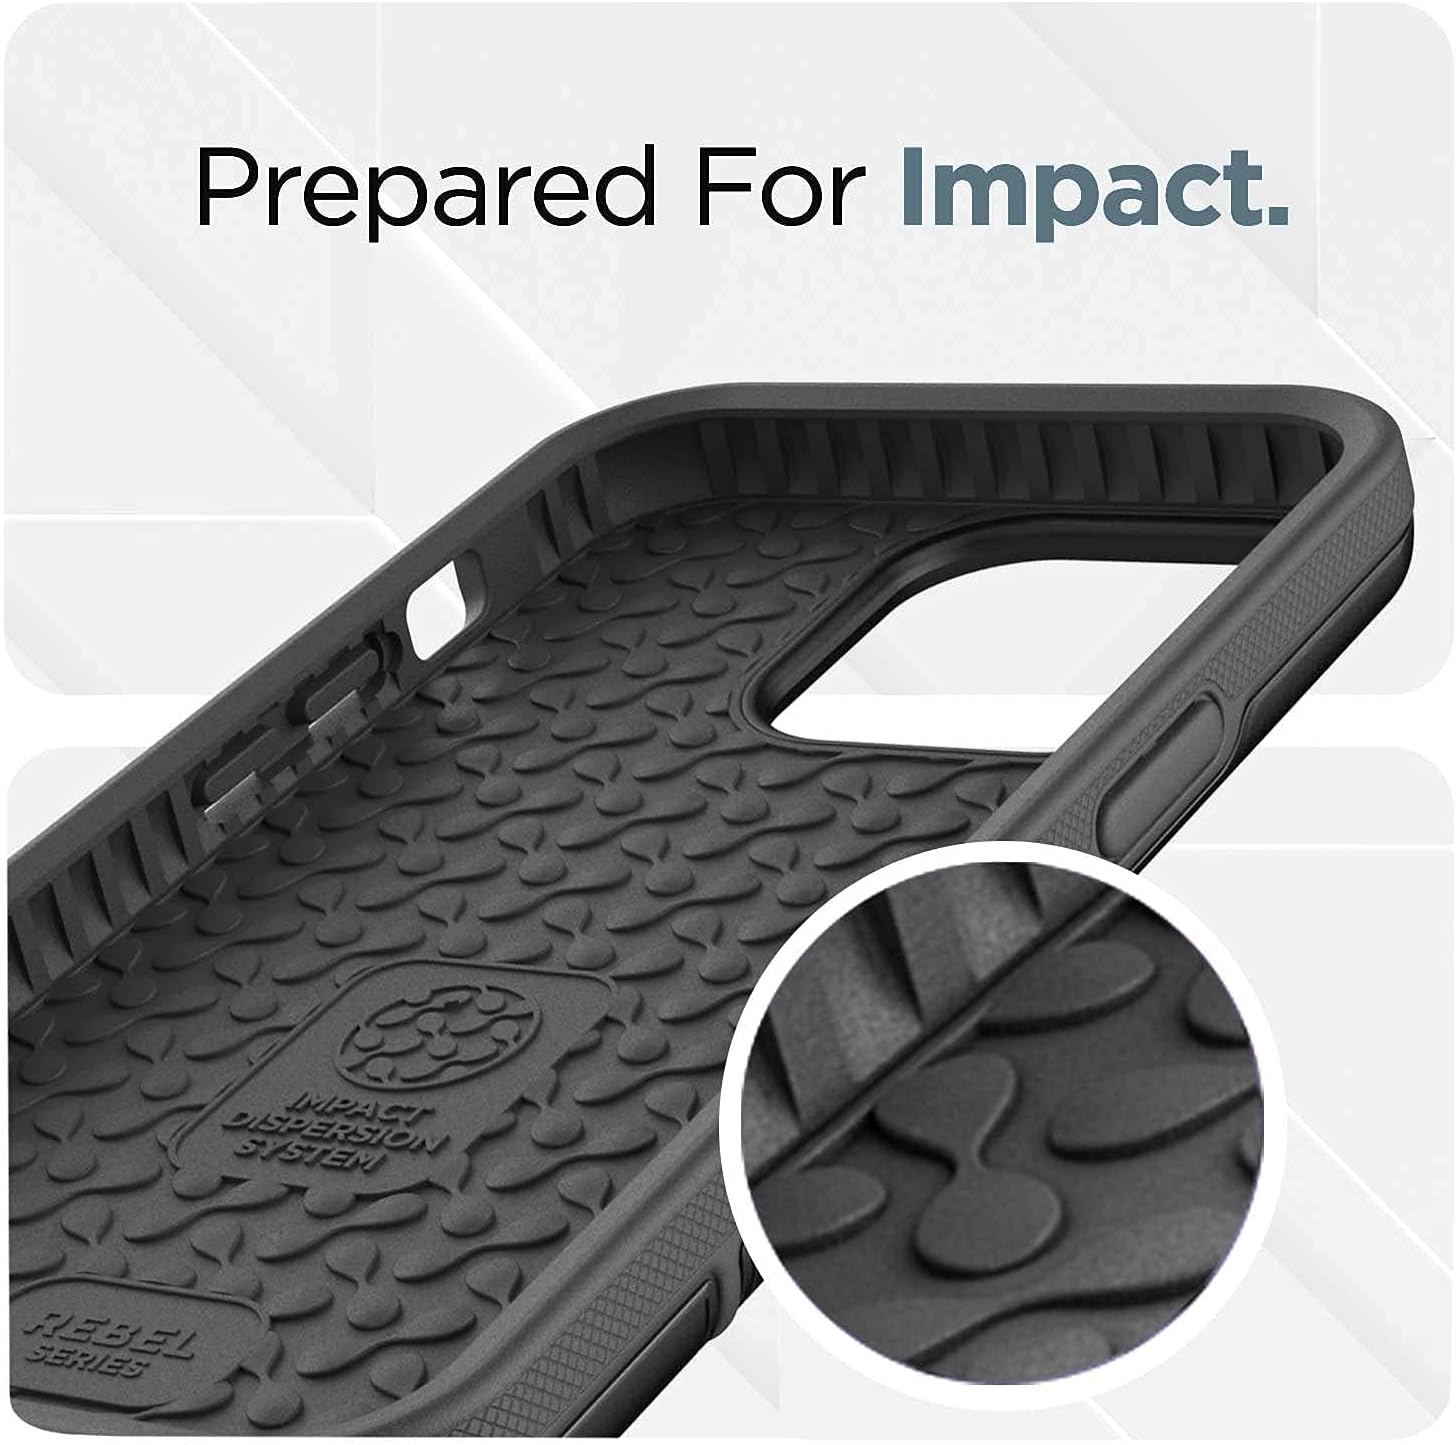 Encased Rebel iPhone 13 Pro Case with Holster, 10ft Impact Tested - Black